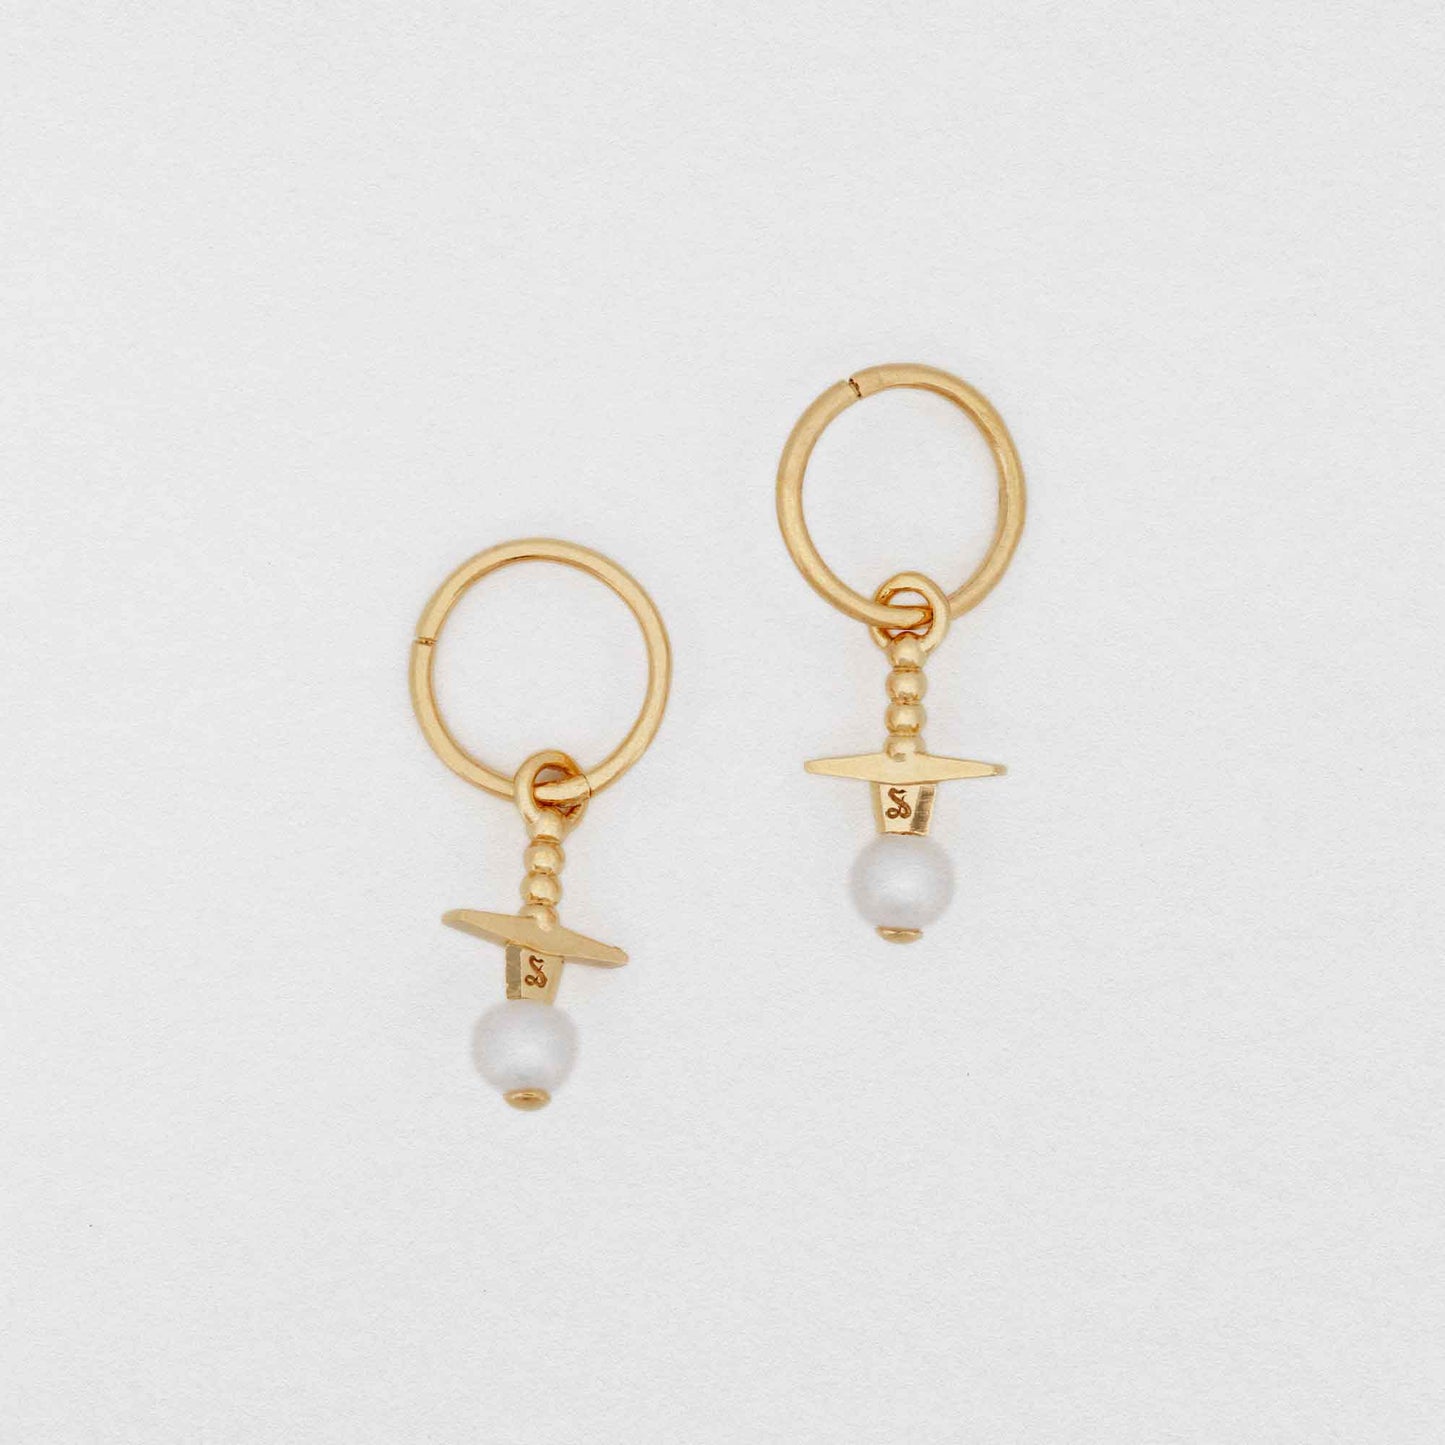 22CT gold vermeil sword earring though pearl stone